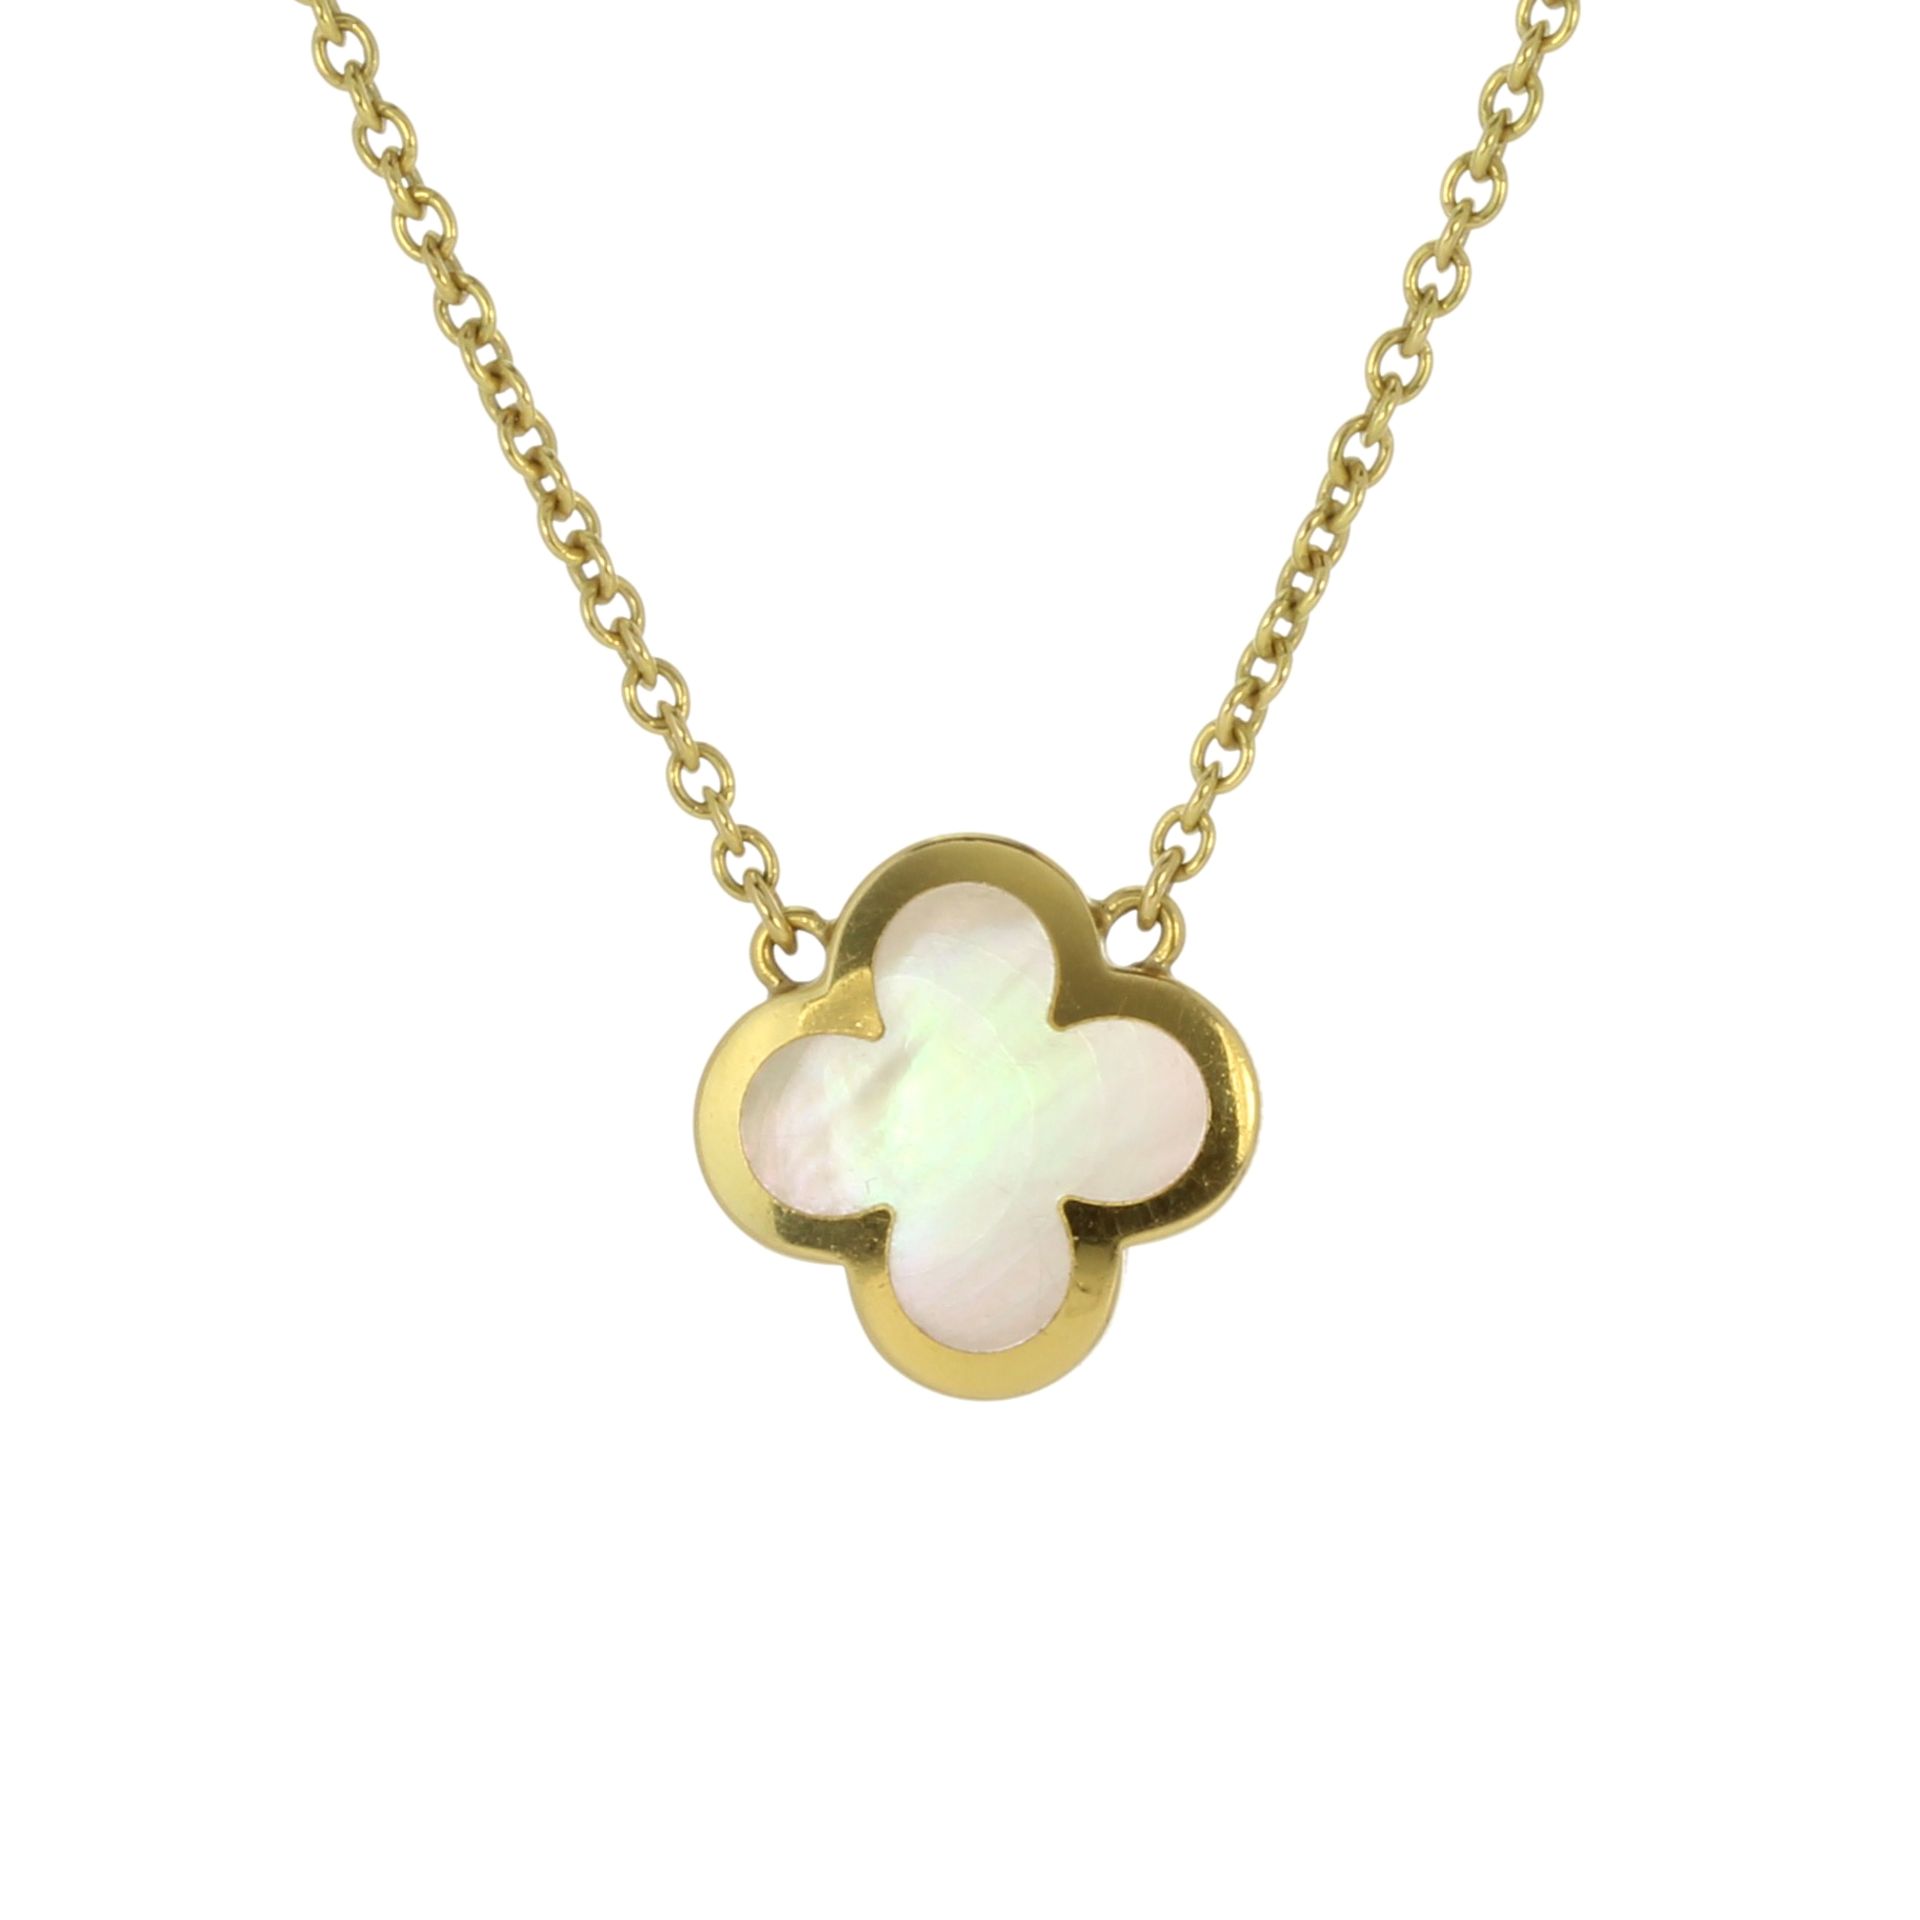 VAN CLEEF & ARPELS A mother of pearl Pure Alhambra pendant / necklace in 18ct yellow gold by Van